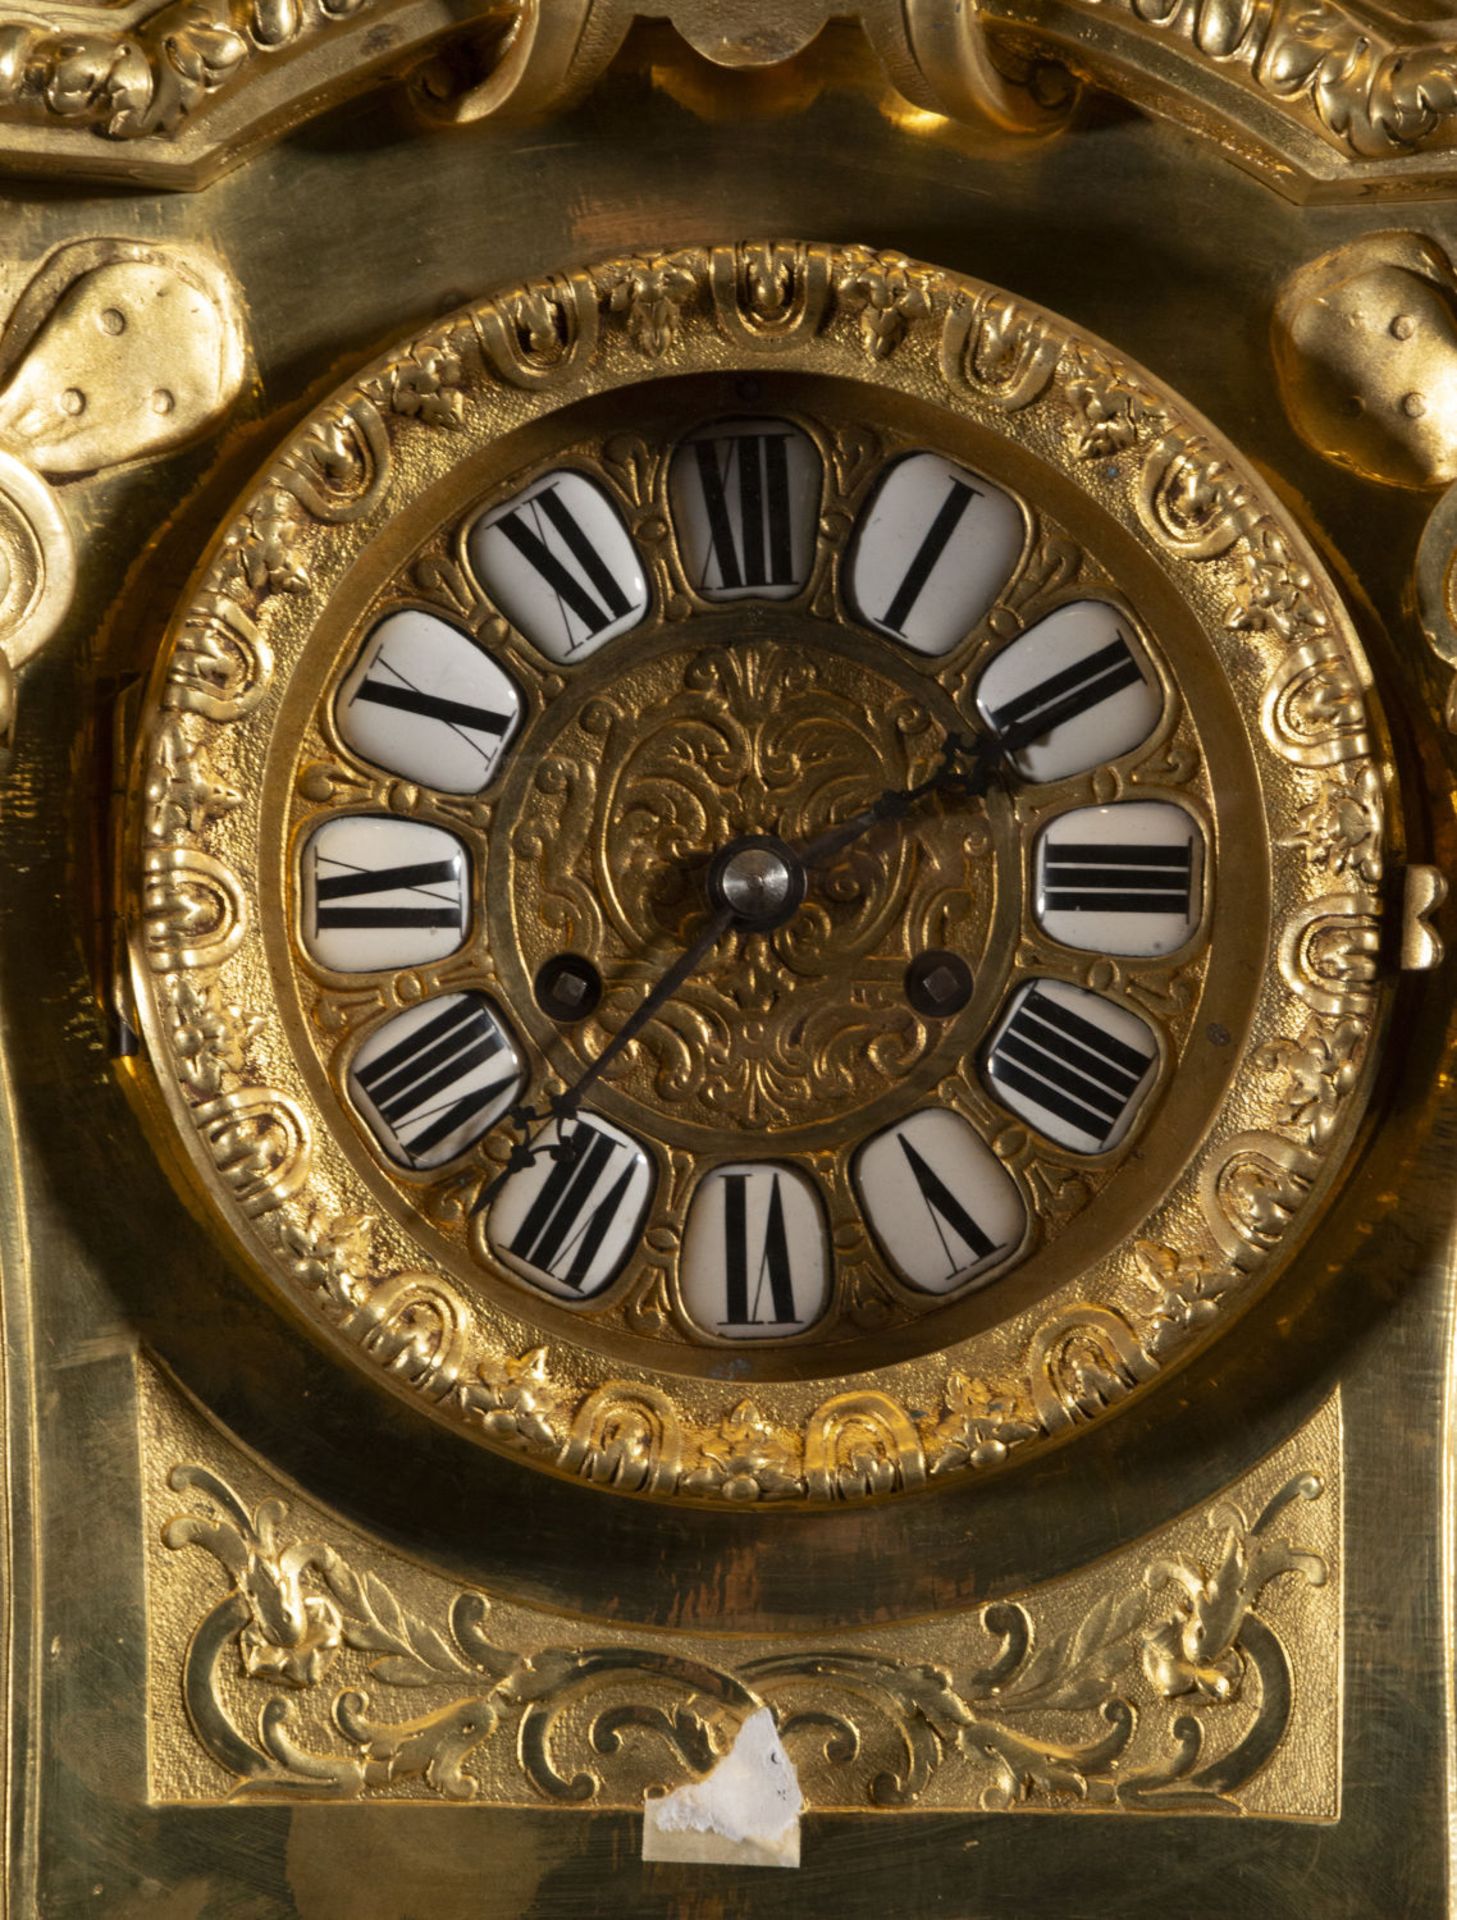 French Napoleon III Portico table clock in mercury gilded bronze from the 19th century - Image 2 of 6